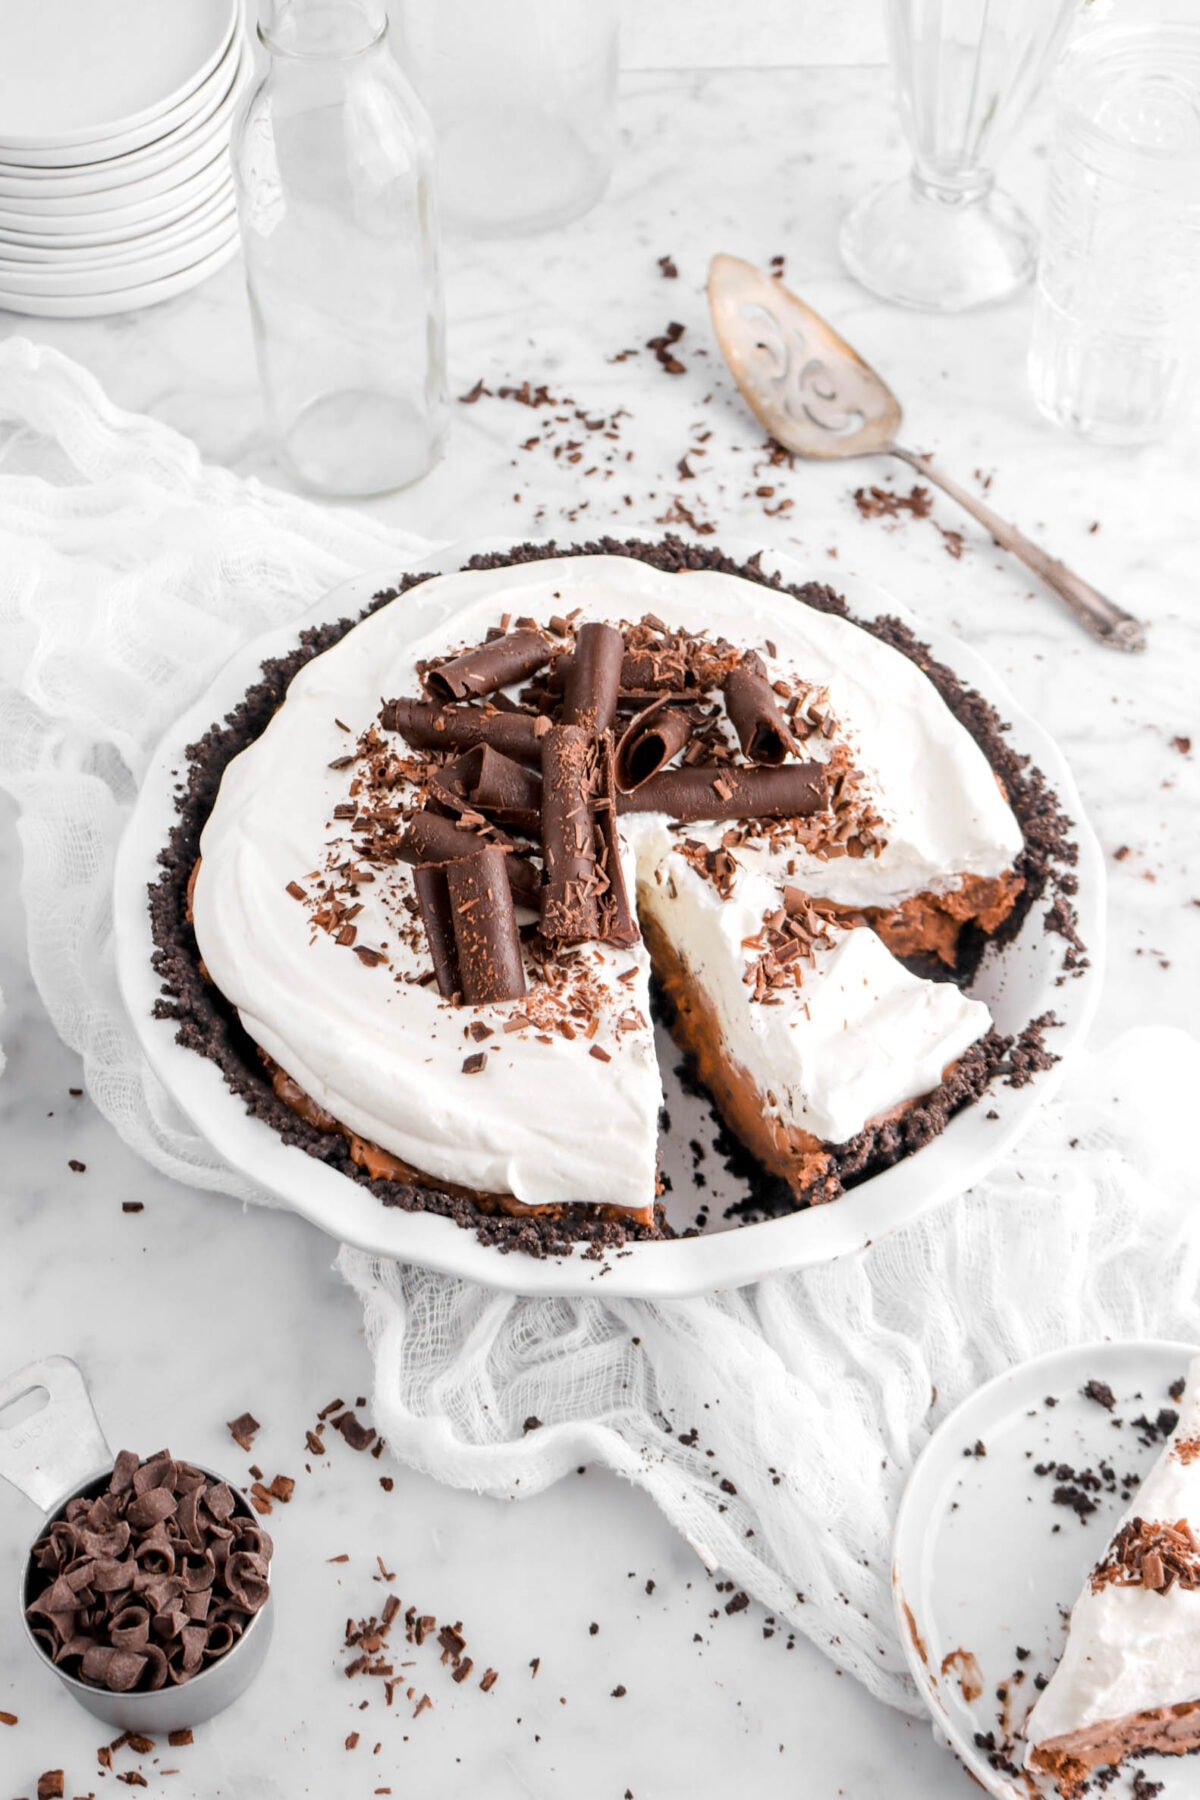 angled shot of mousse pie with a slice still inside pie plate with large chocolate curls, chocolate shavings, and slice of pie beside on white cheesecloth